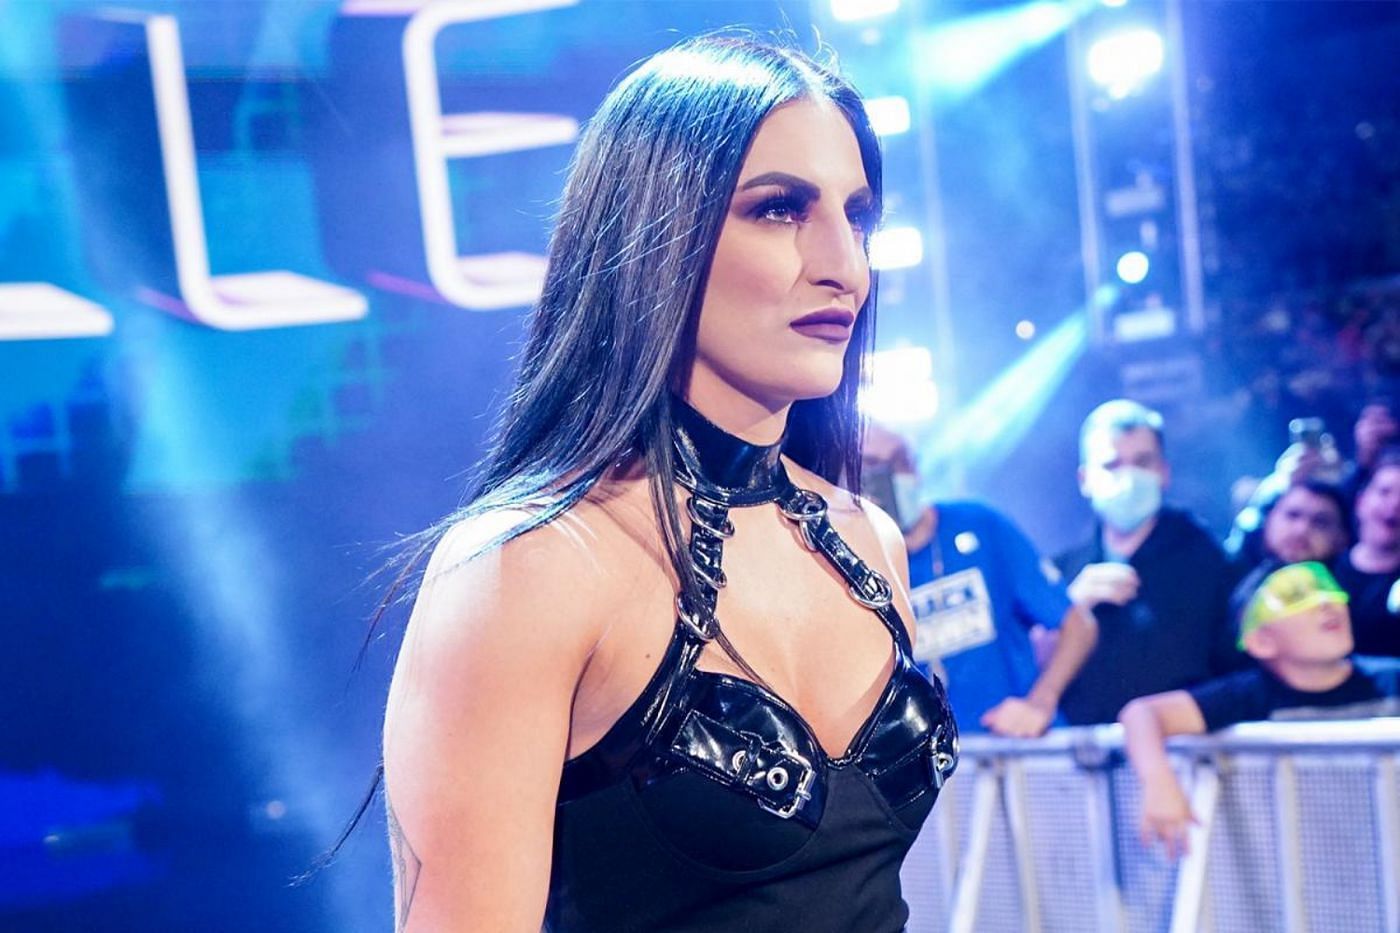 Sonya Deville has been busy on SmackDown